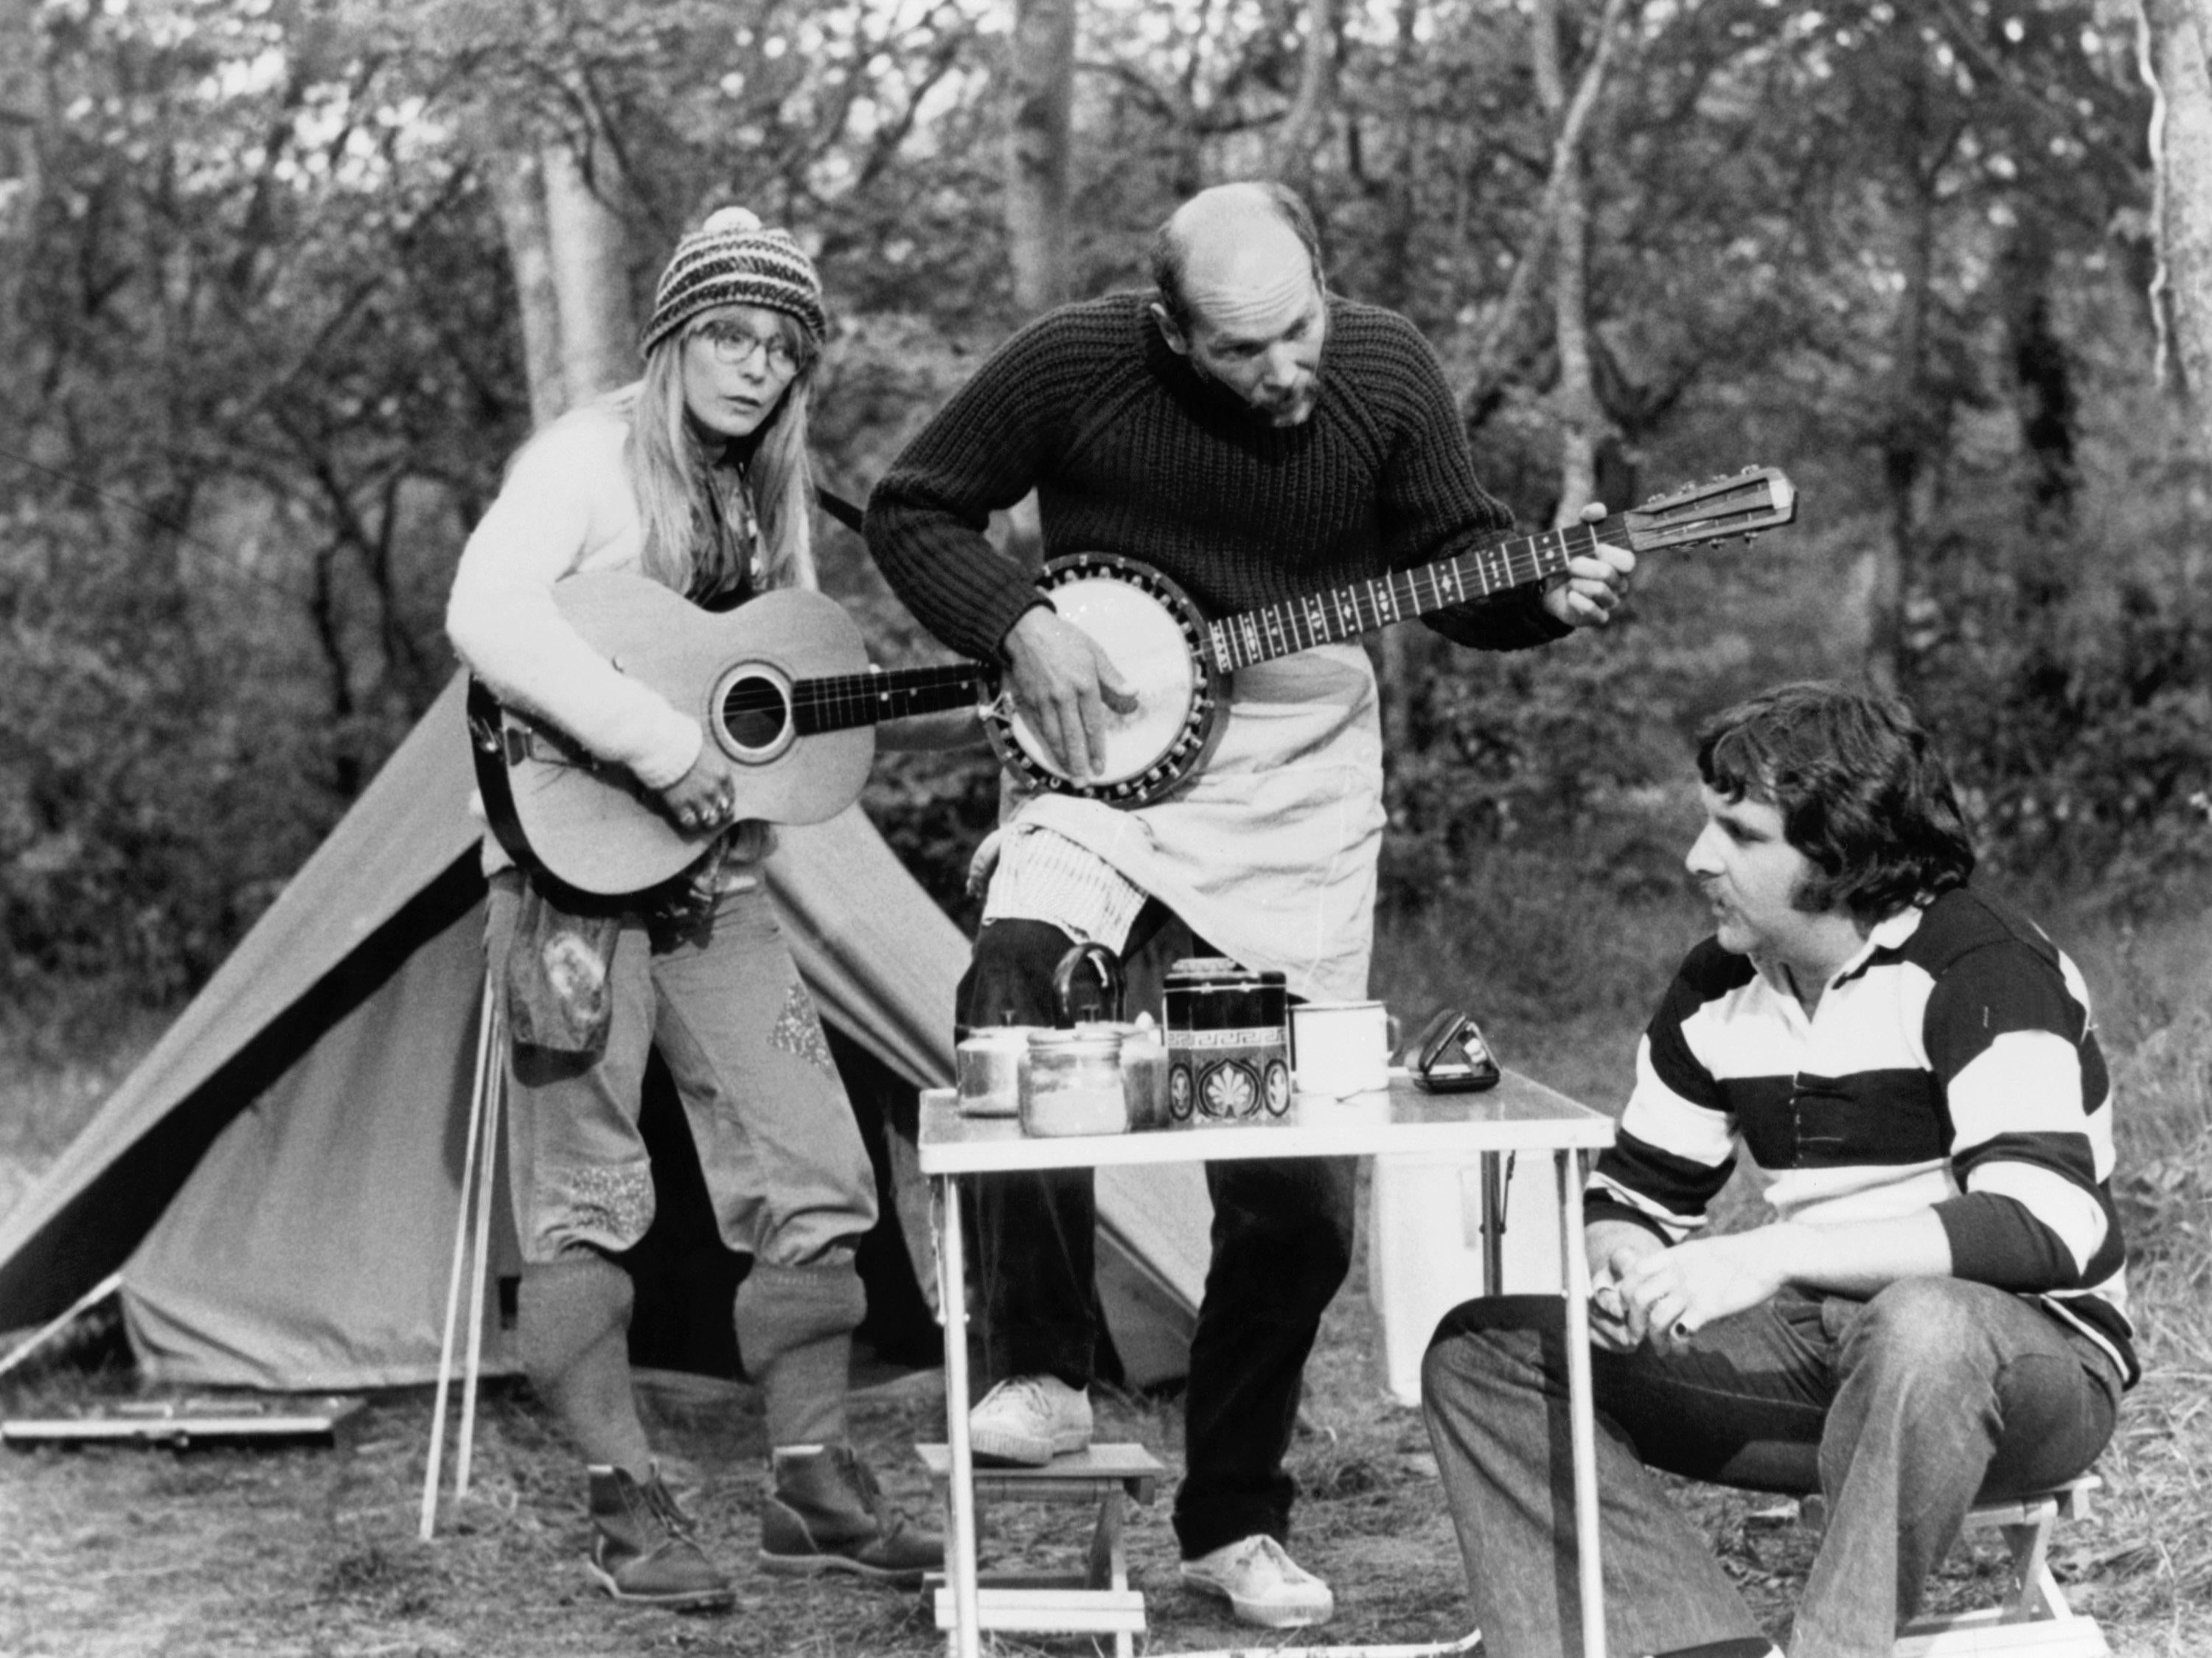 Steadman as Candice Marie, Roger Sloman as Keith and Anthony O’Donnell as Ray in Mike Leigh’s classic camping film ‘Nuts in May’ (1976)